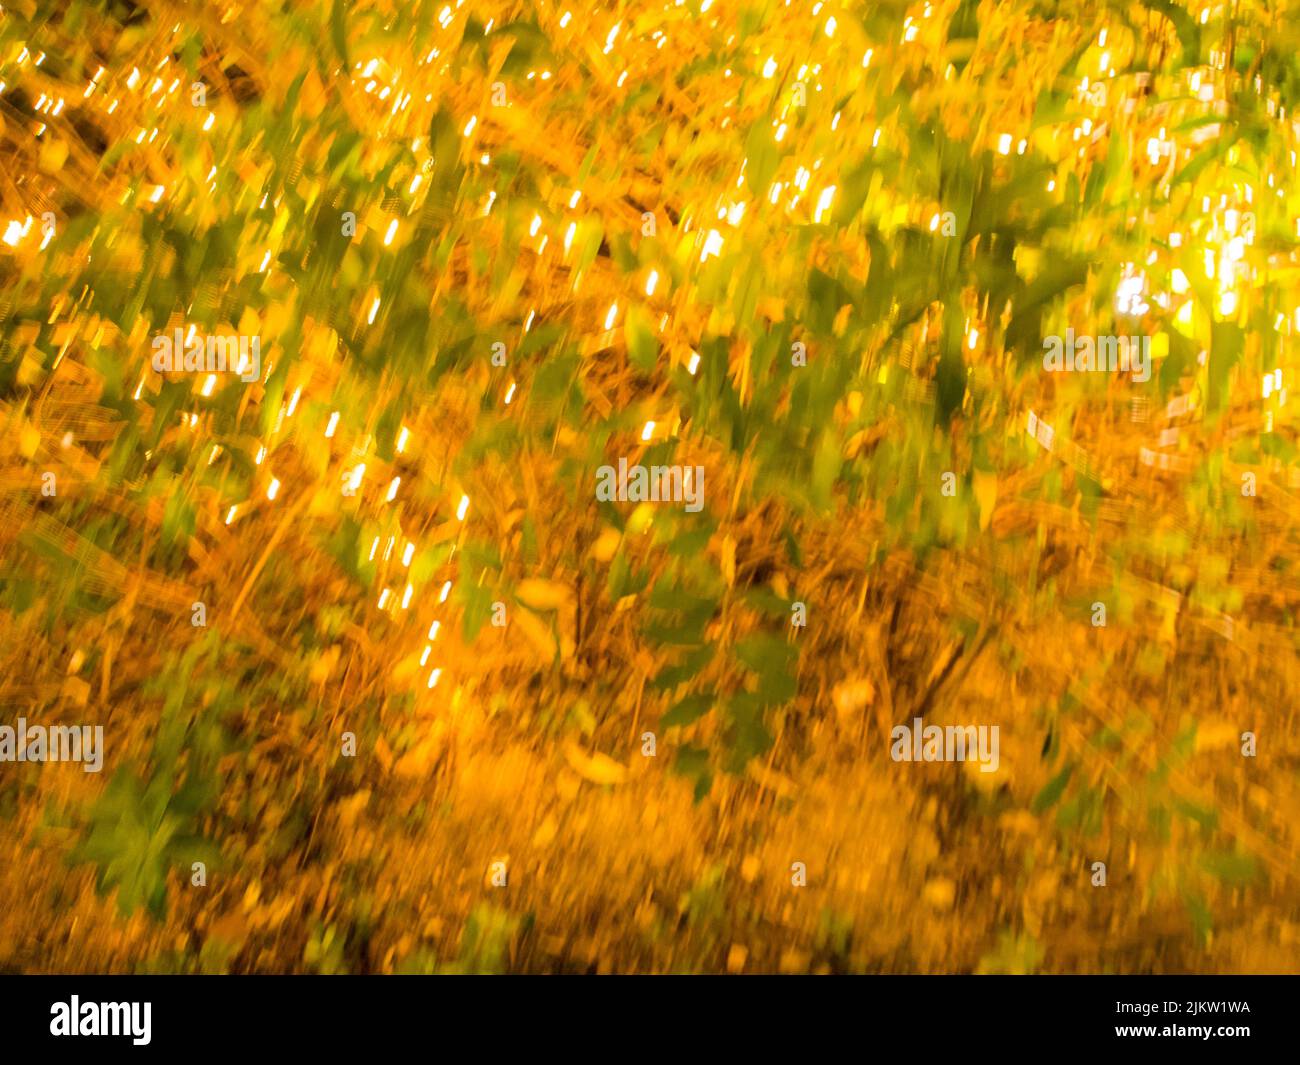 Green plants on a blurred bokeh yellow background Stock Photo